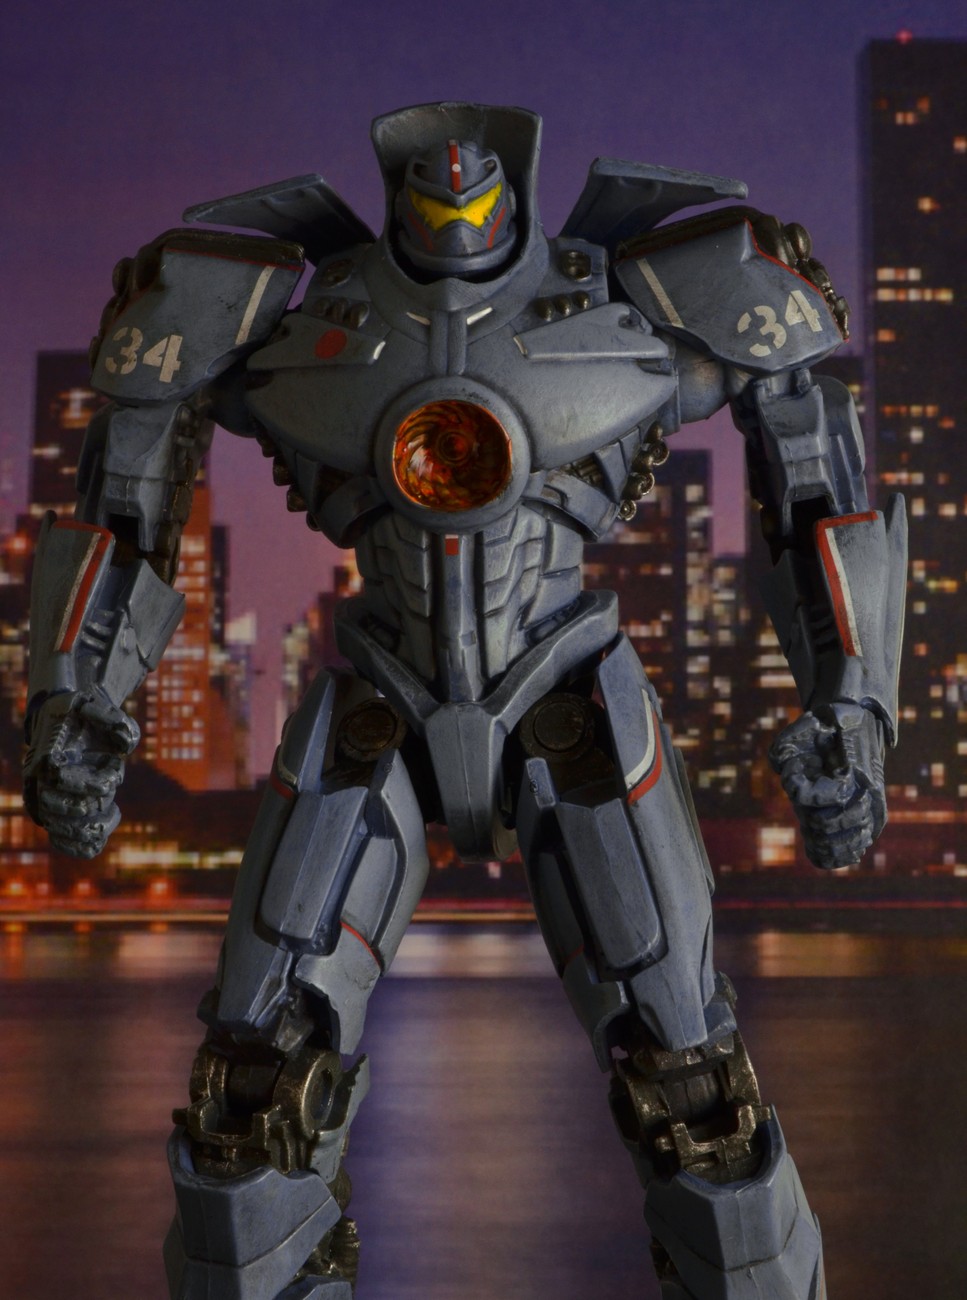 PACIFIC RIM Figures and Collectibles from NECA | Video